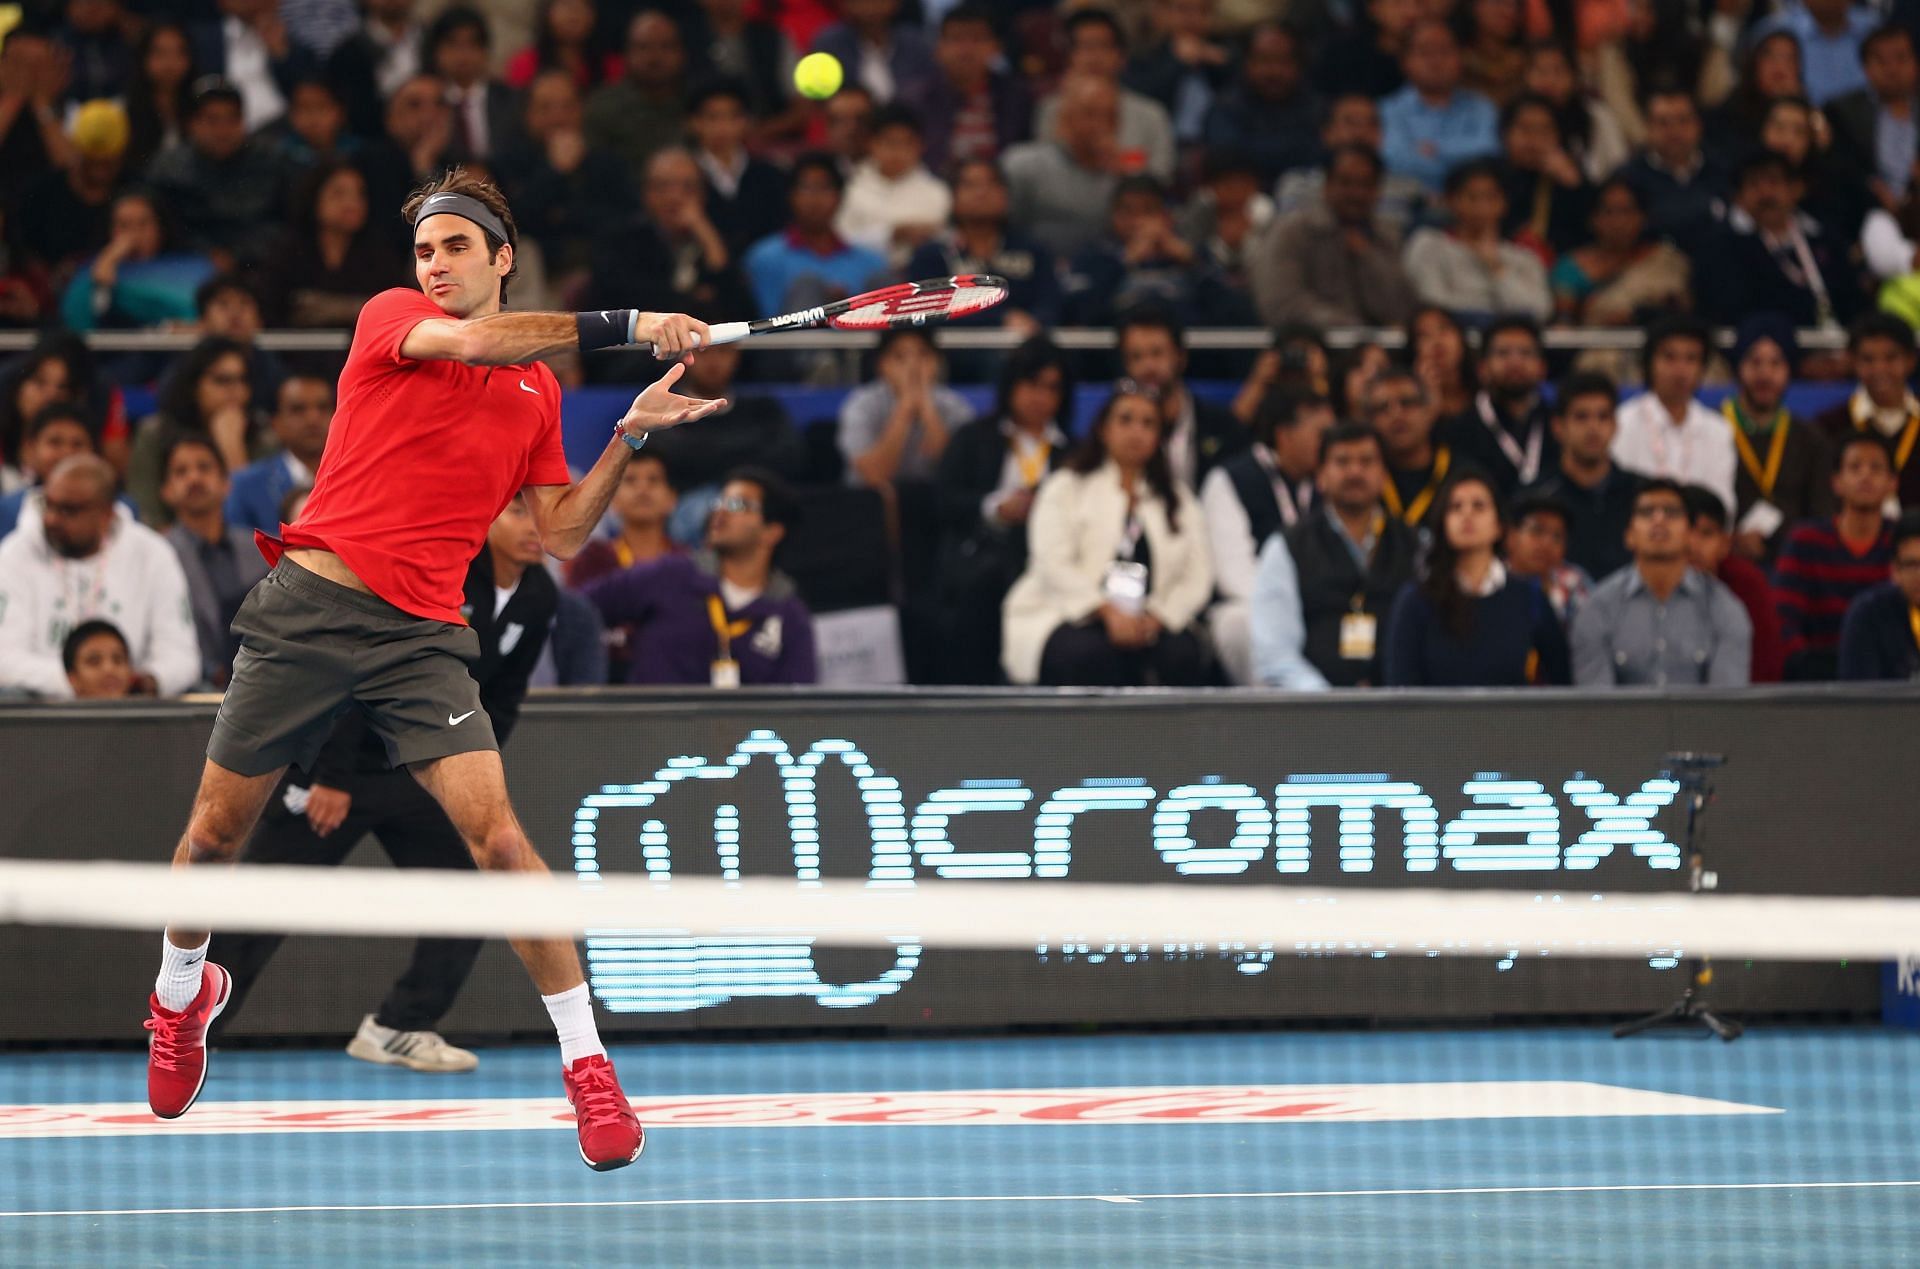 Roger Federer of the Indian Aces plays a forehand against Novak Djokovic of the UAE Royals during the Coca-Cola International Premier Tennis League third leg at the Indira Gandhi Indoor Stadium December 8, 2014 in Delhi, Delhi - Getty Images